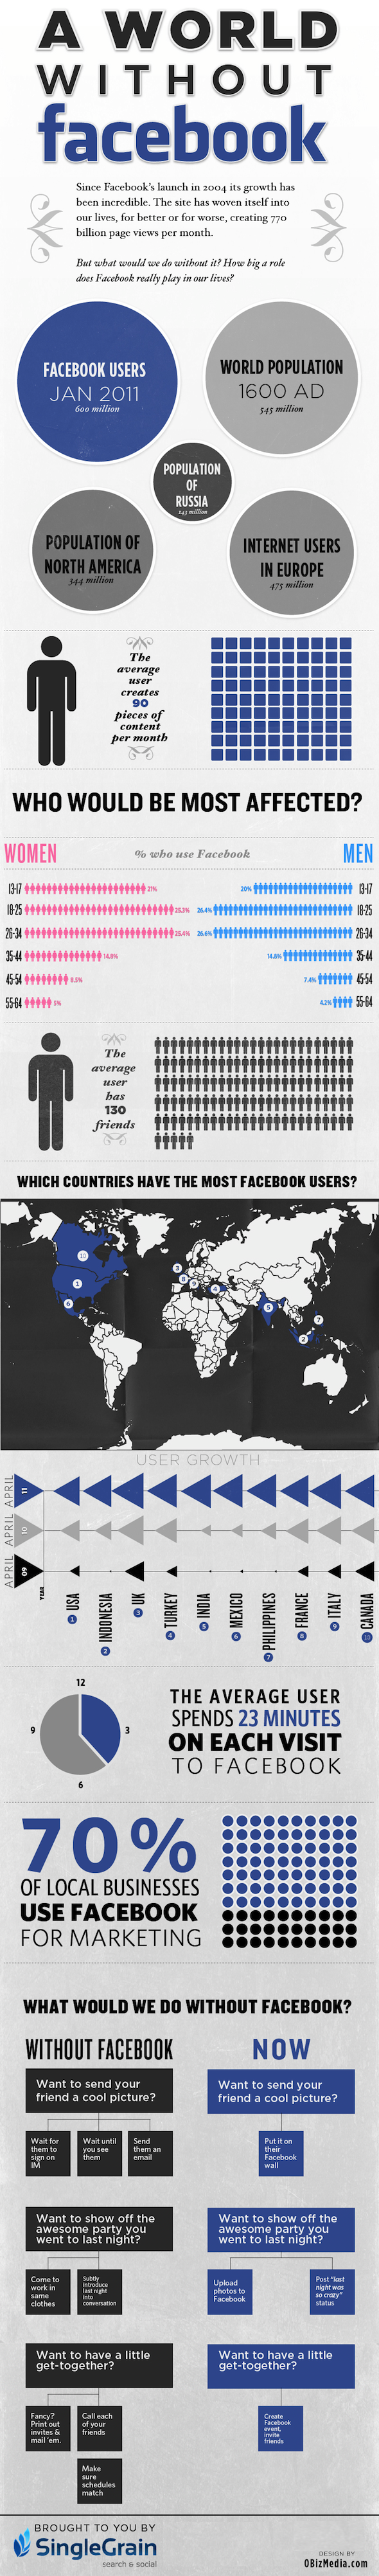 World without facebook small resized 600